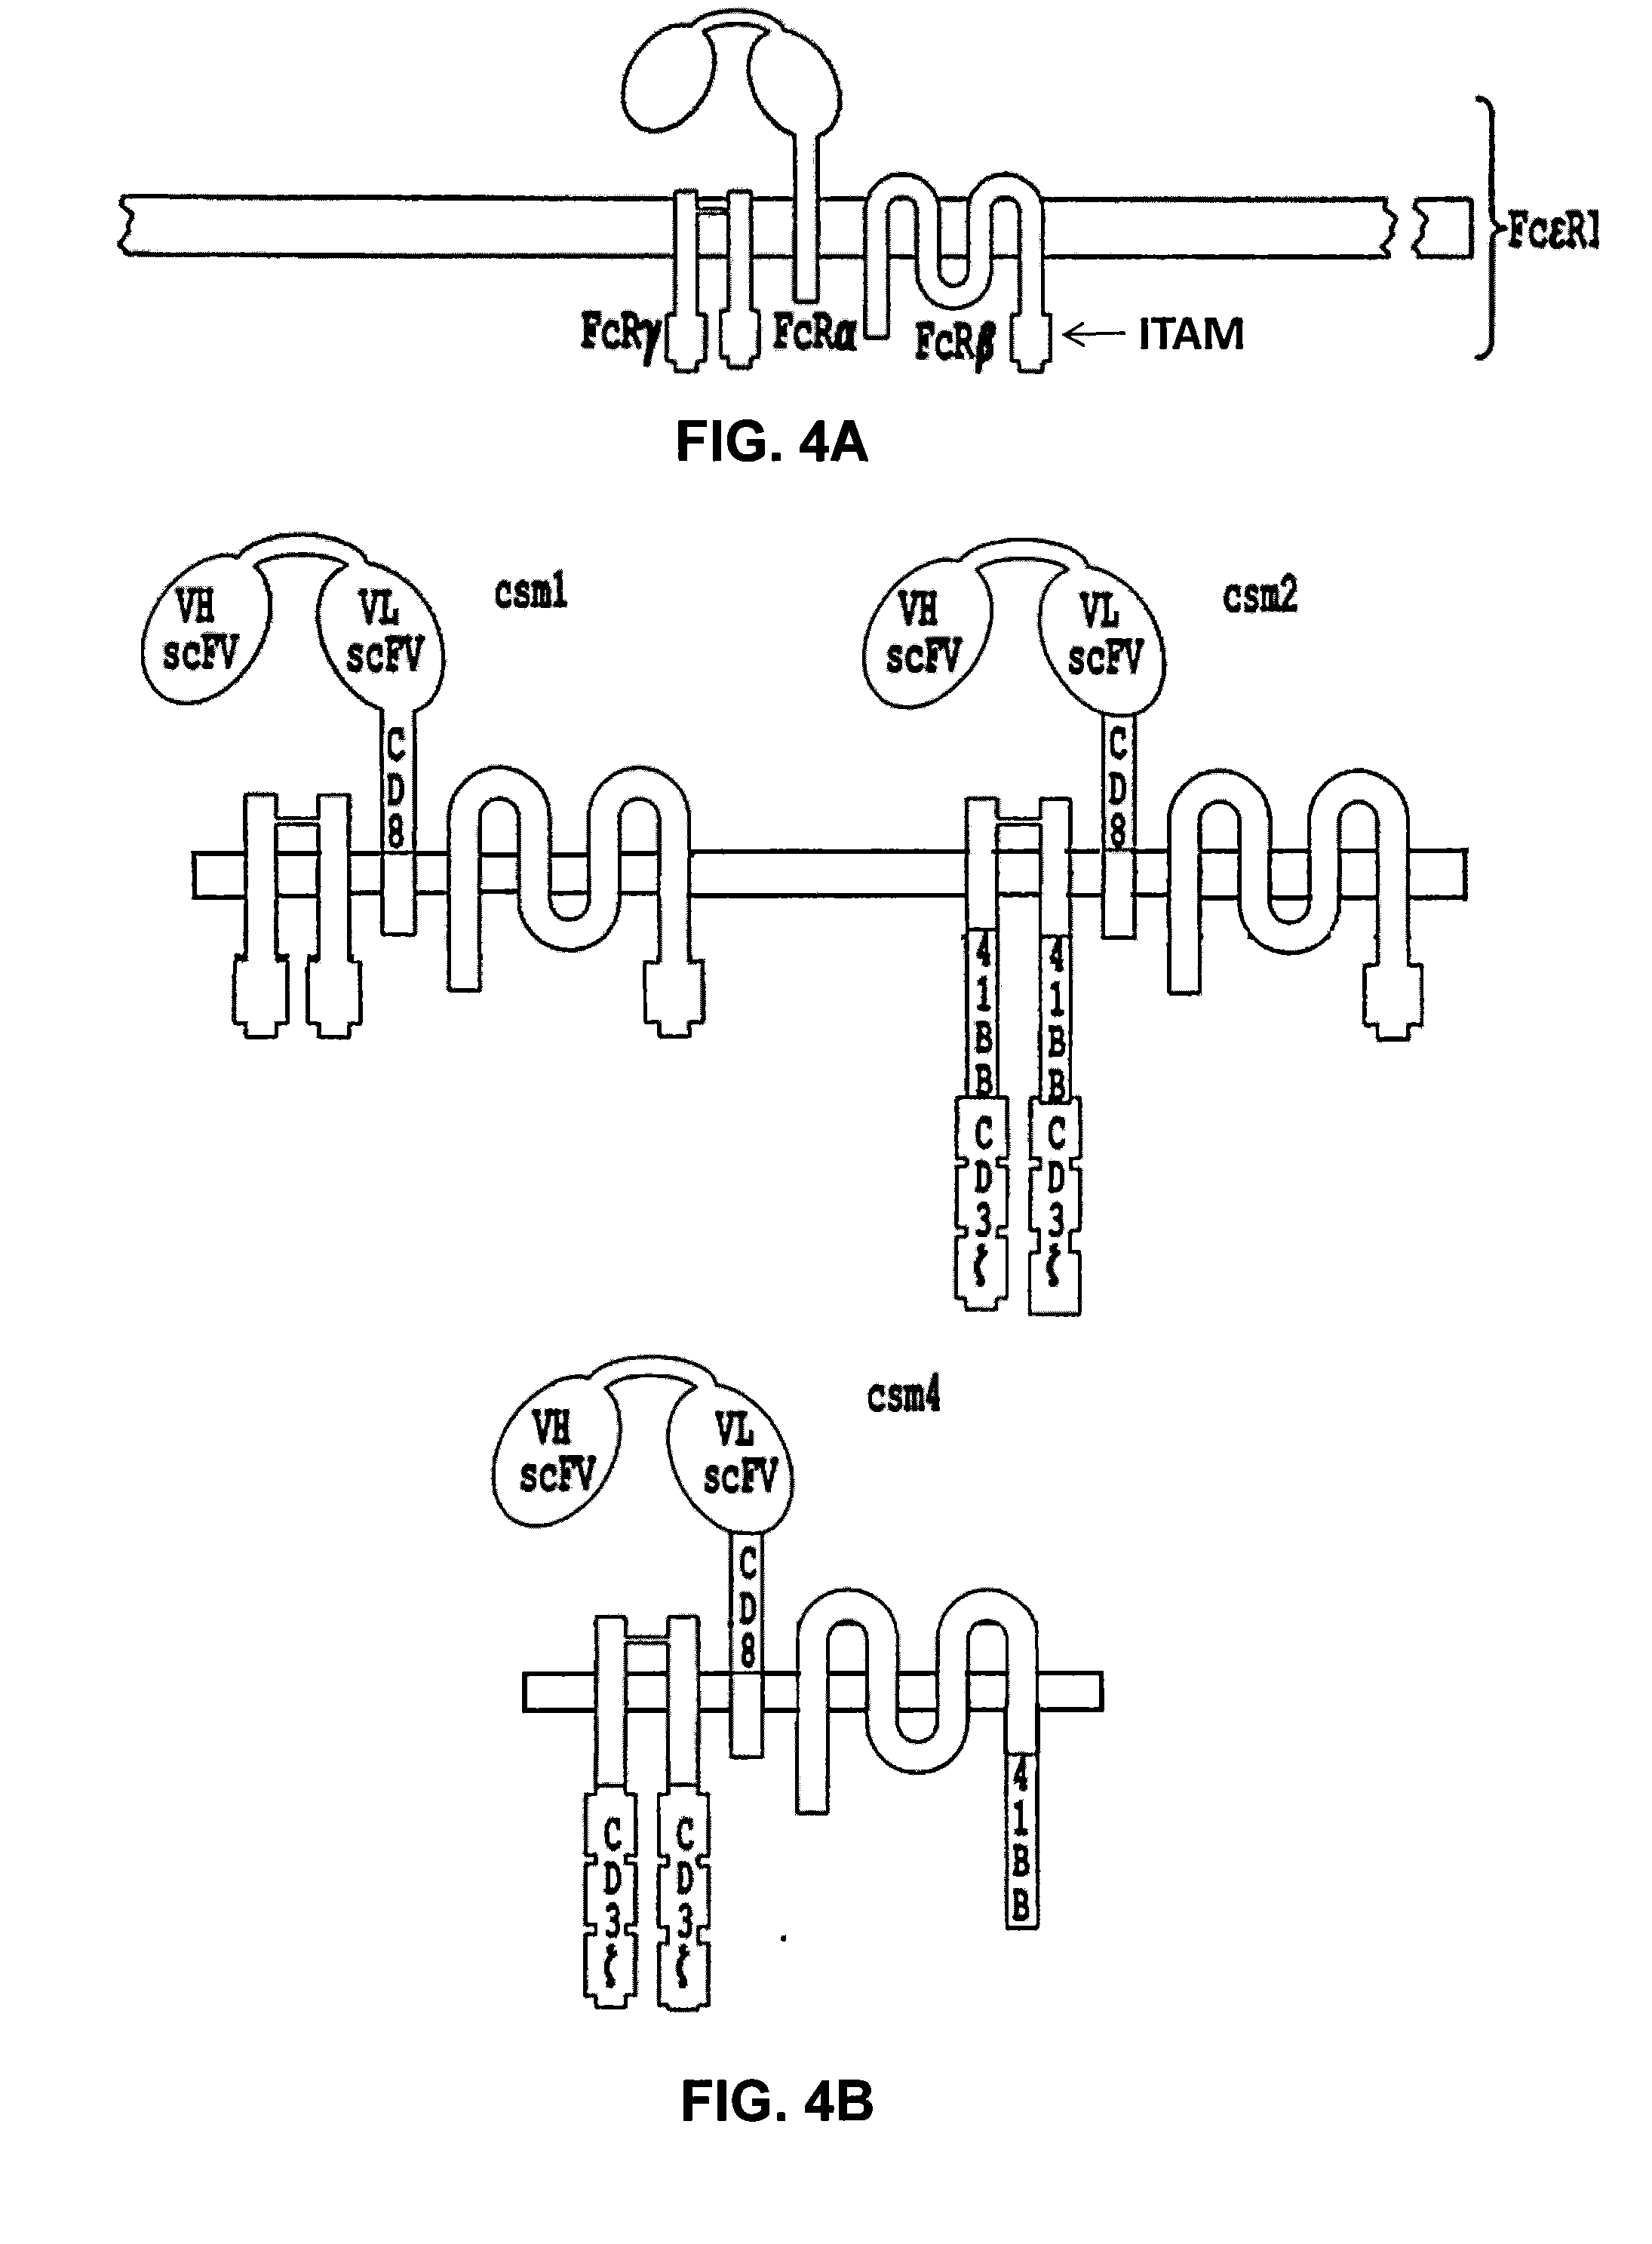 Multi-Chain Chimeric Antigen Receptor and Uses Thereof